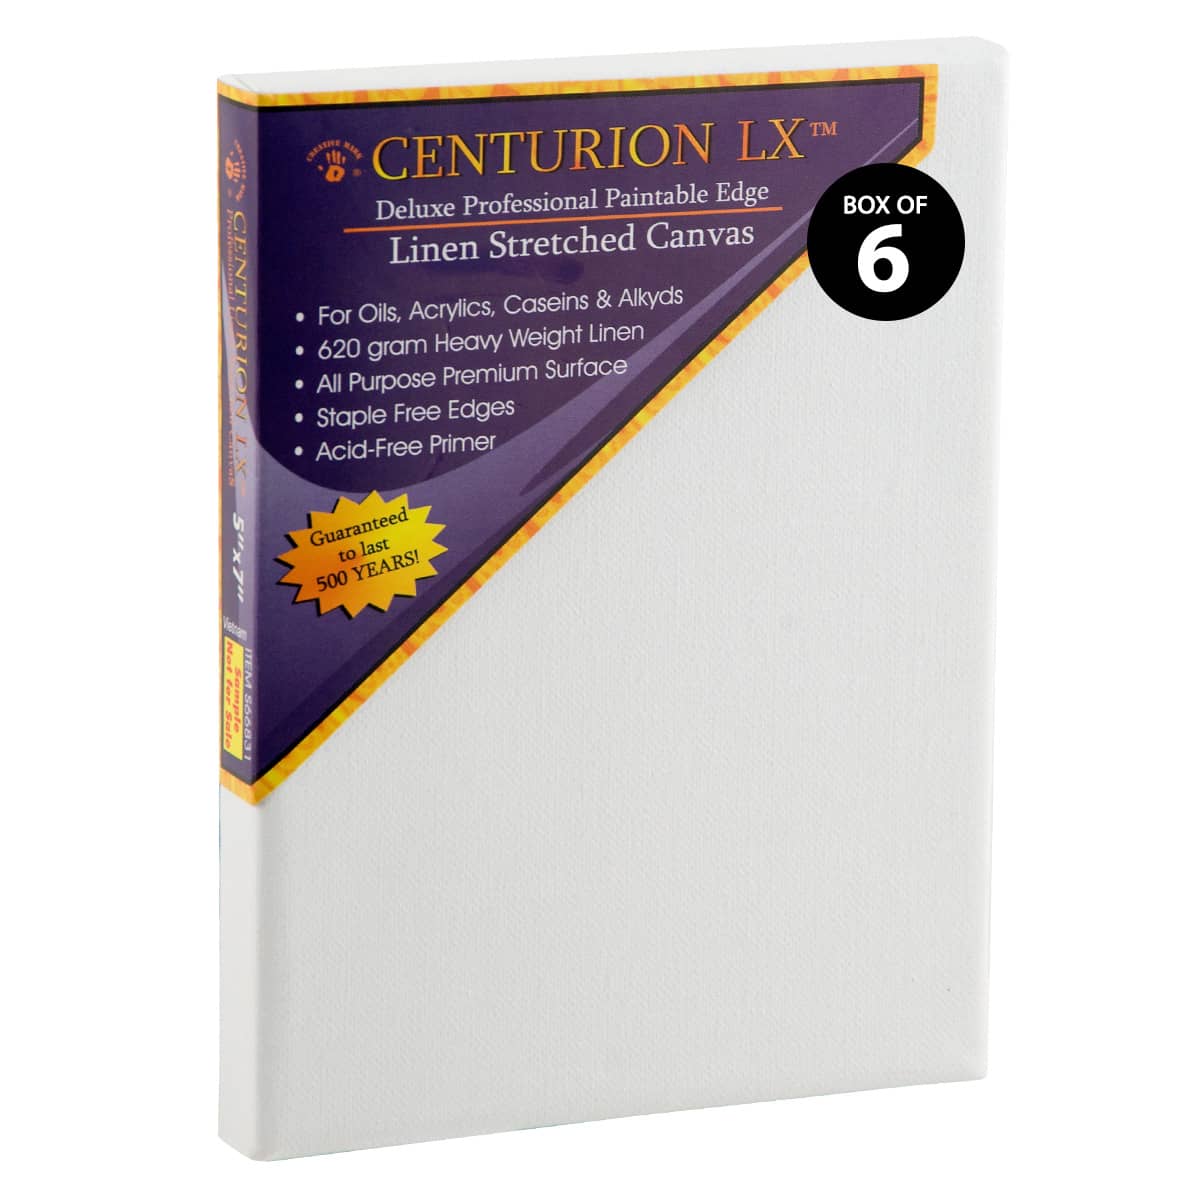 Centurion LX Acrylic Primed Linen Stretched Canvas 3/4” , 11x14" Box of 6